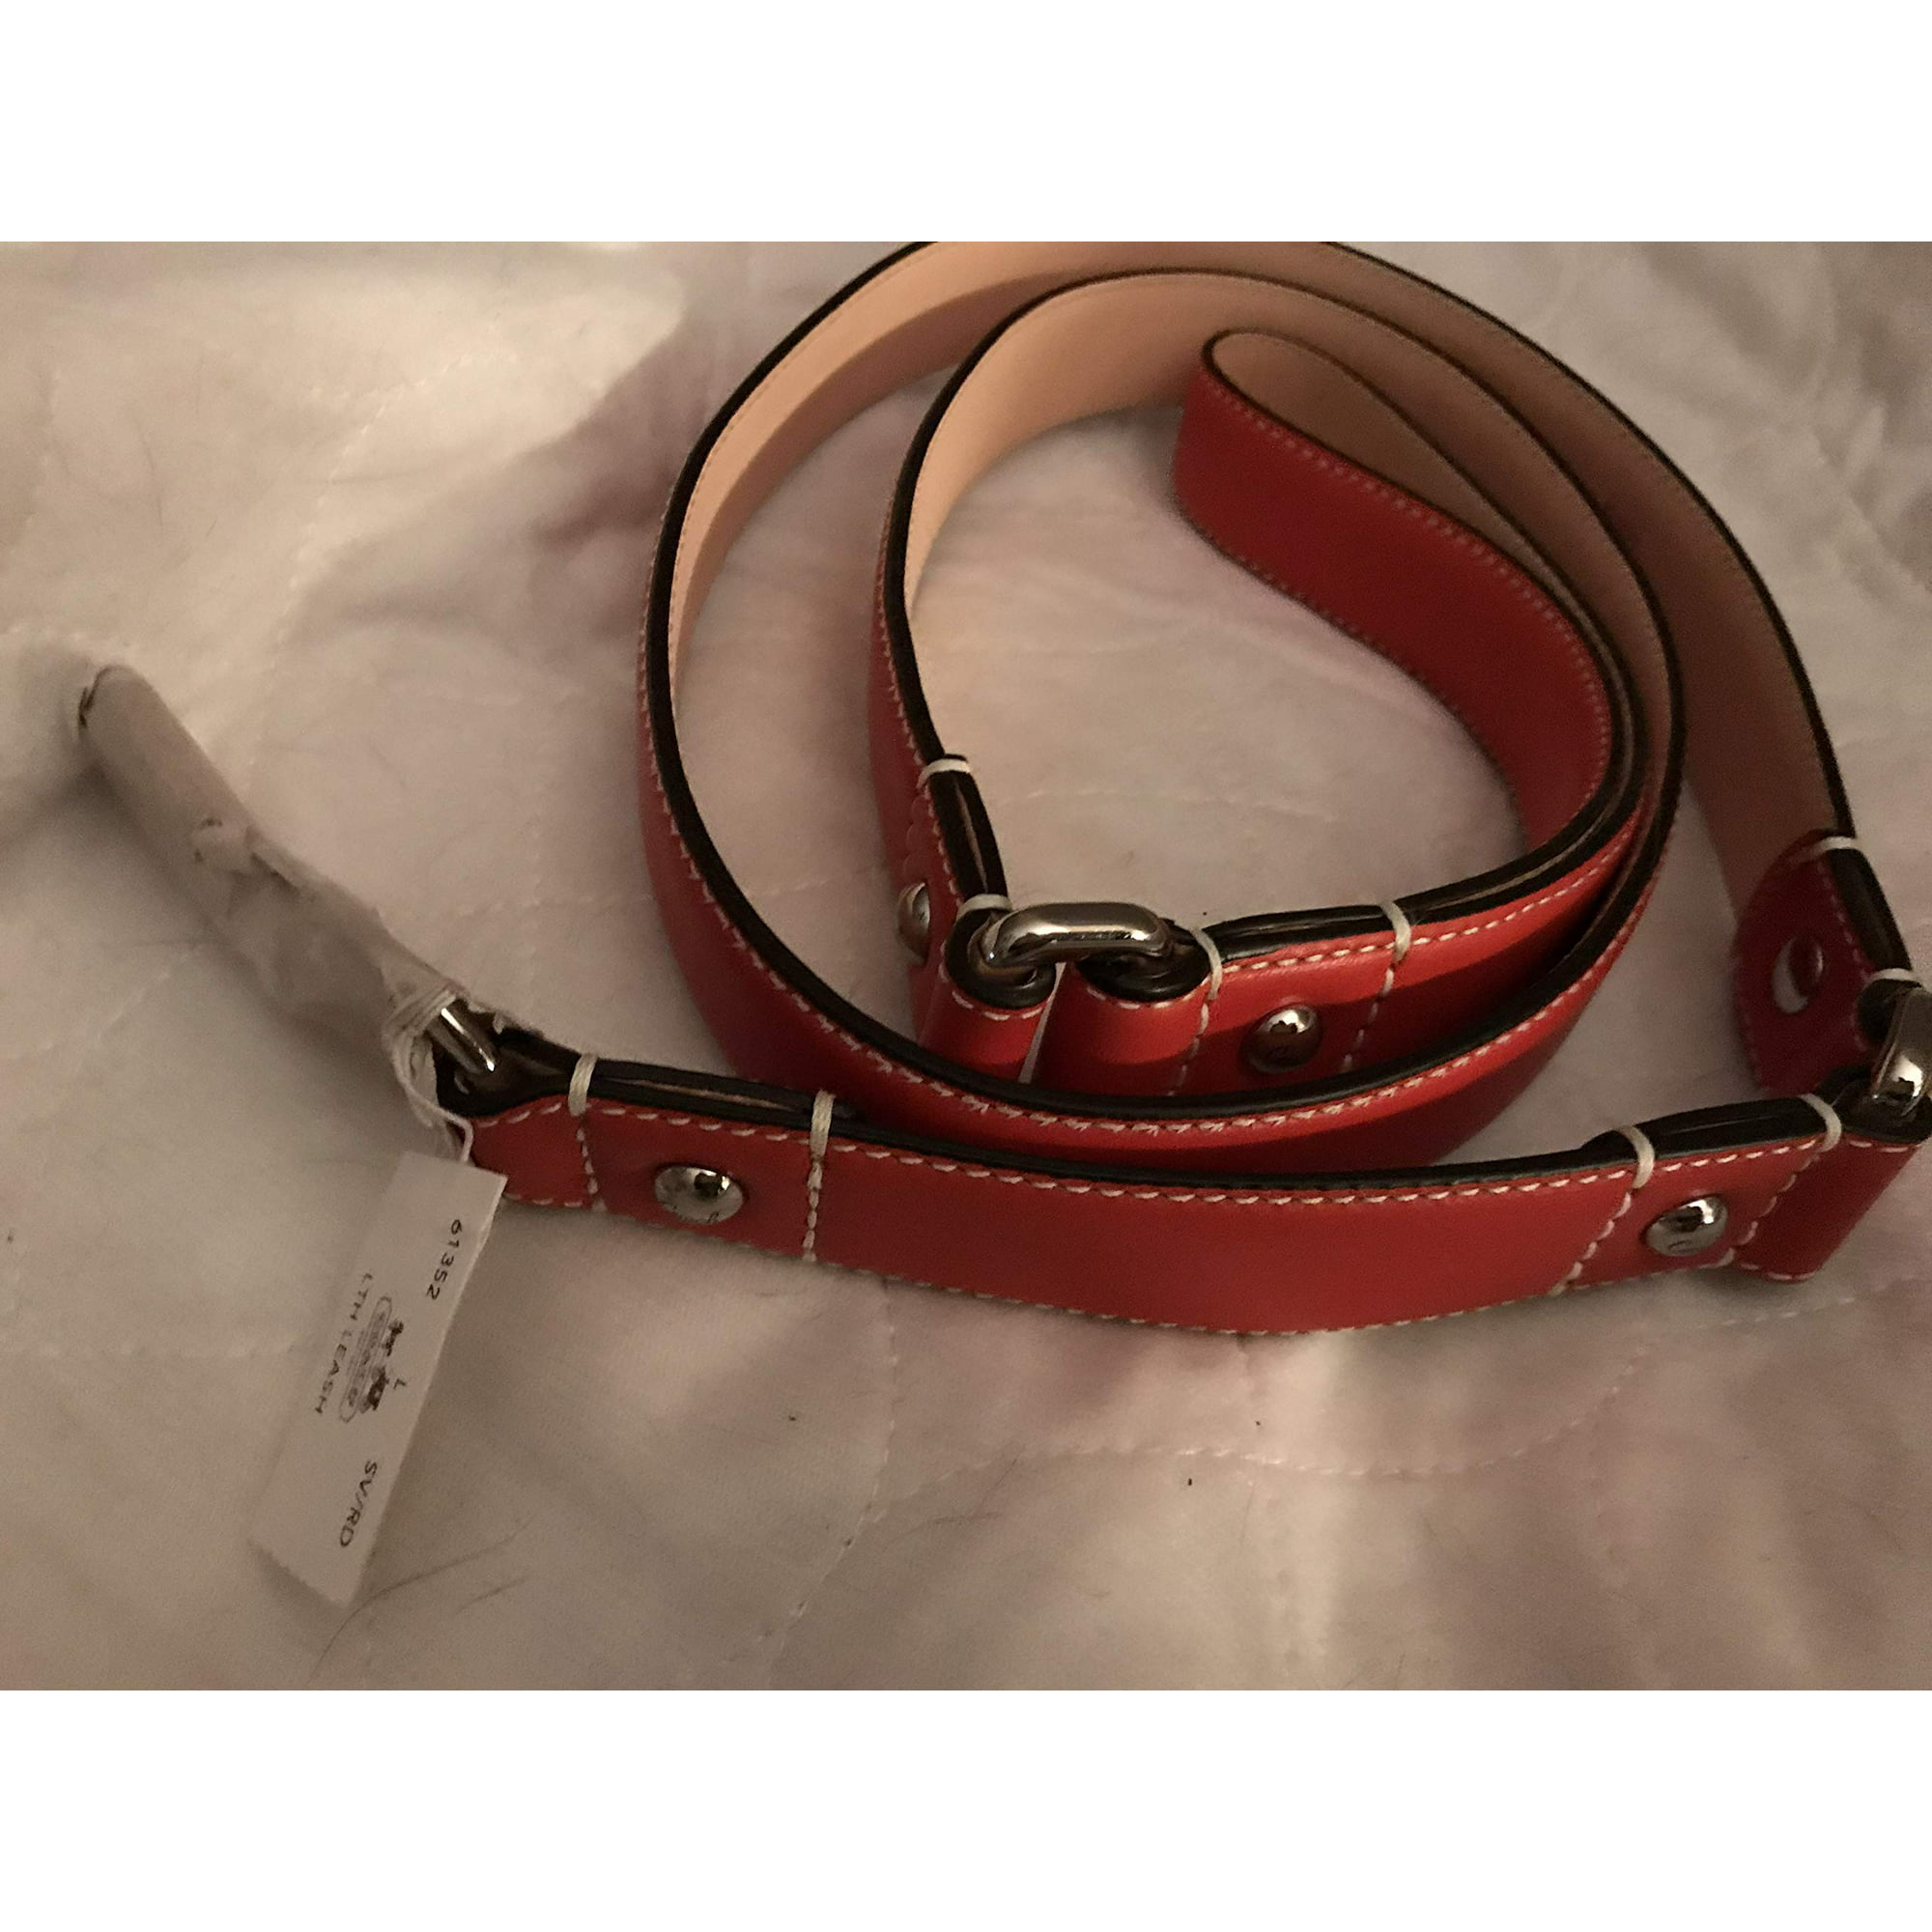 COACH Red Leather Dog Leash Size Large | Walmart Canada